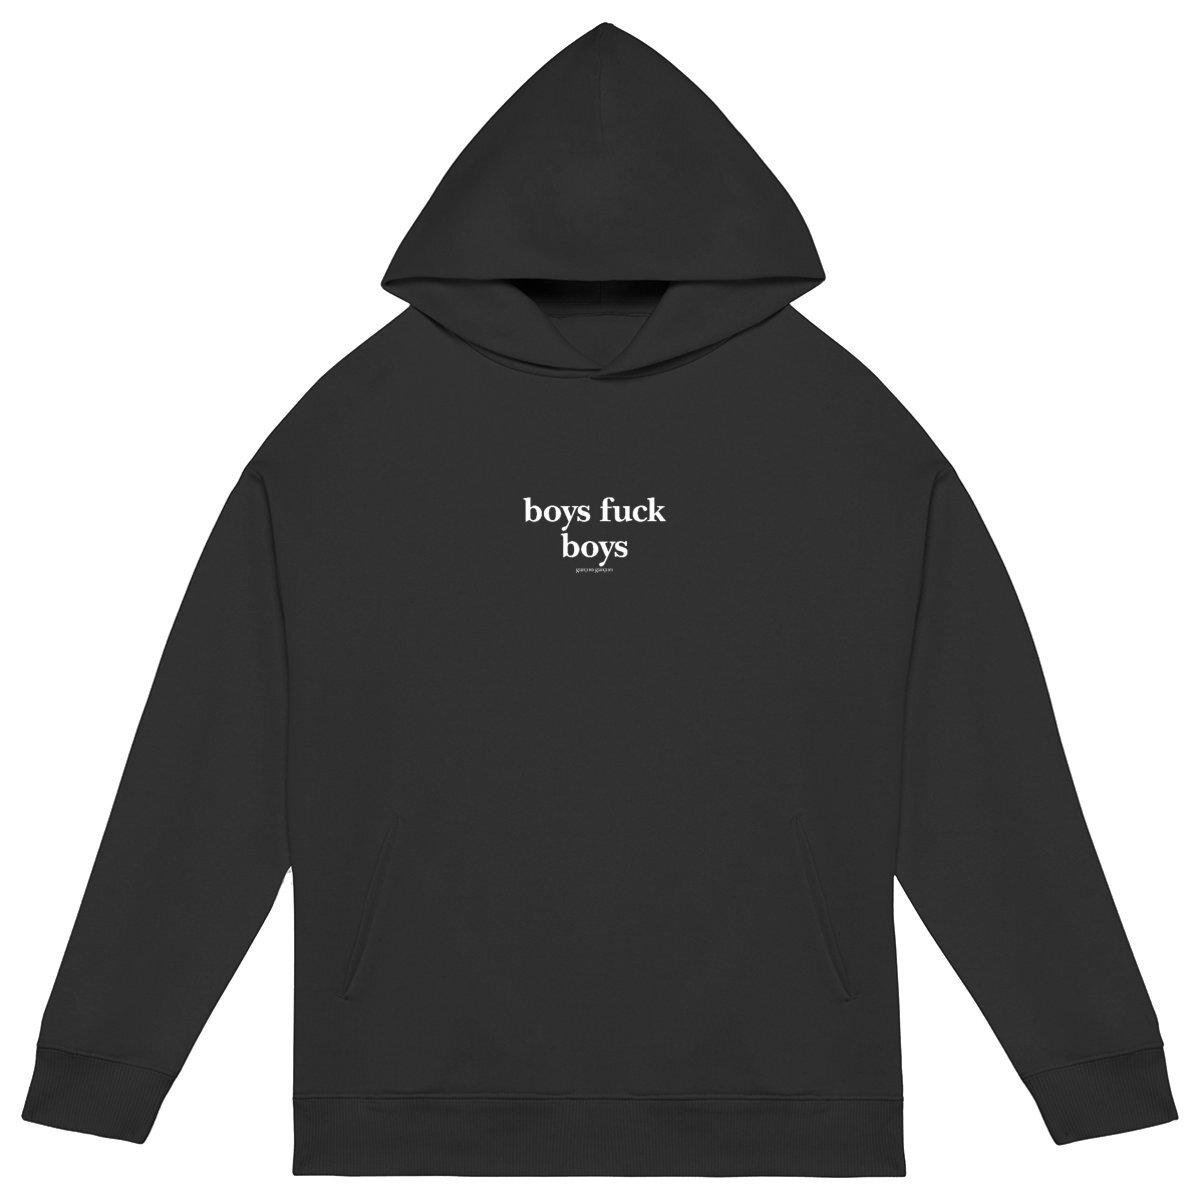 boys fuck boys hoodie over. garçon garçon essentiel oversized hoodie. Sleek in black and whispering Parisian chic, this hoodie is the sartorial whisper of 'garçon garçon' — a statement of understated elegance. Perfect for those who carry a piece of Paris in their hearts and a touch of audacity on their sleeves.